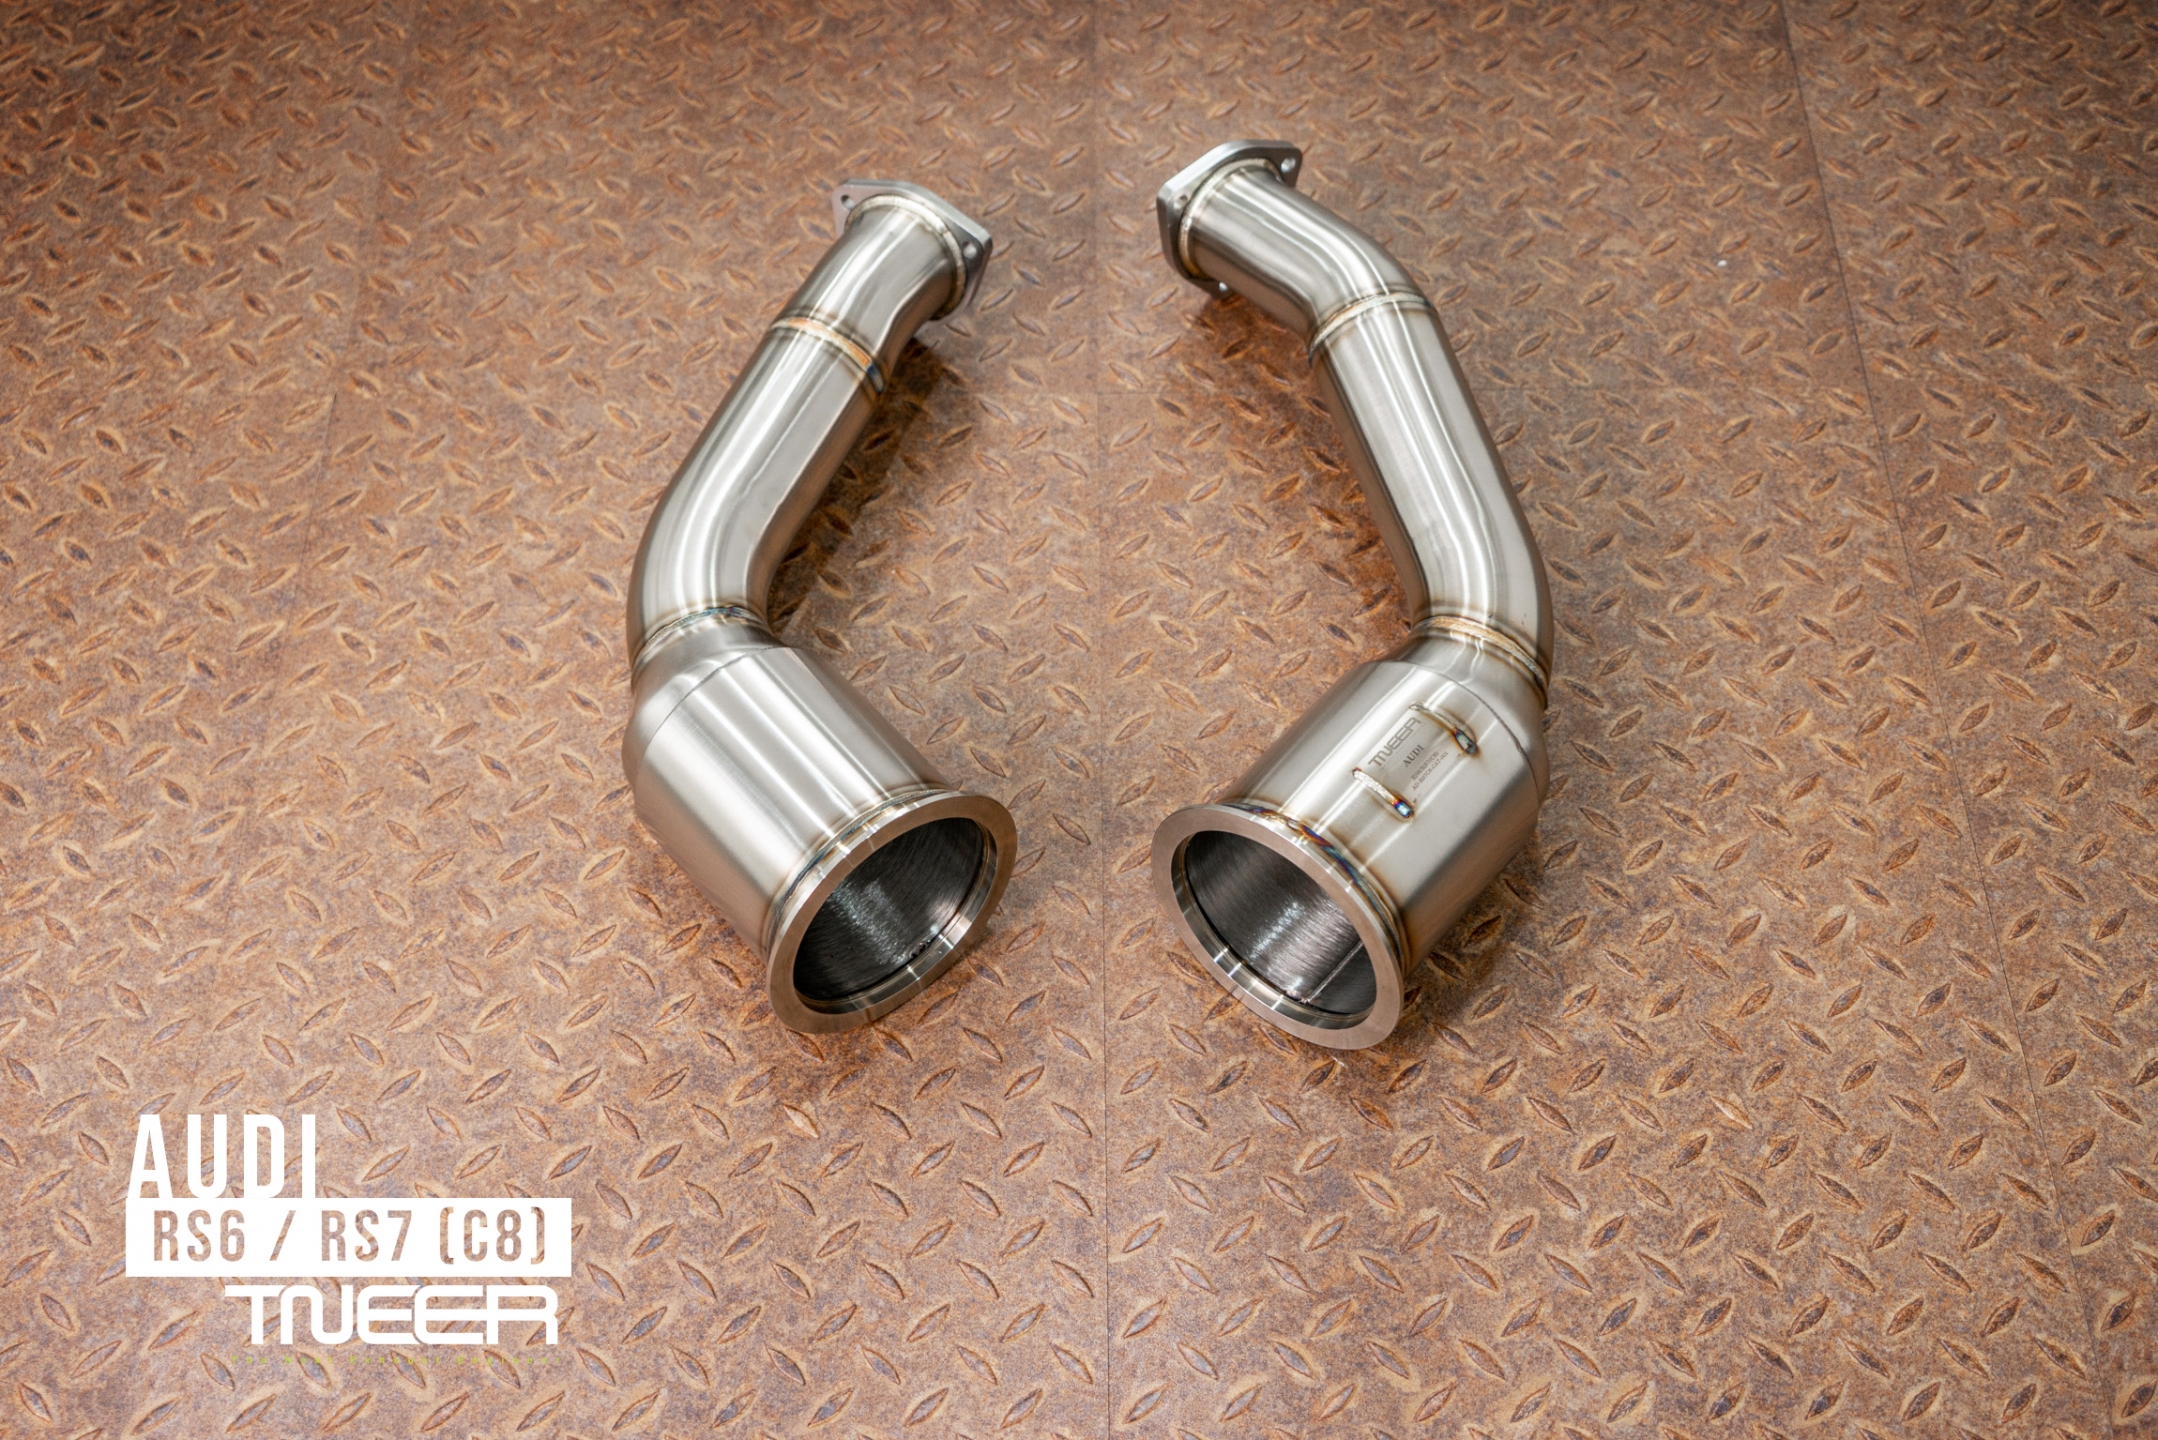 Audi RS6 (C8) 4.0 TFSI V8 TNEER Exhaust System with Dual Silver Tips